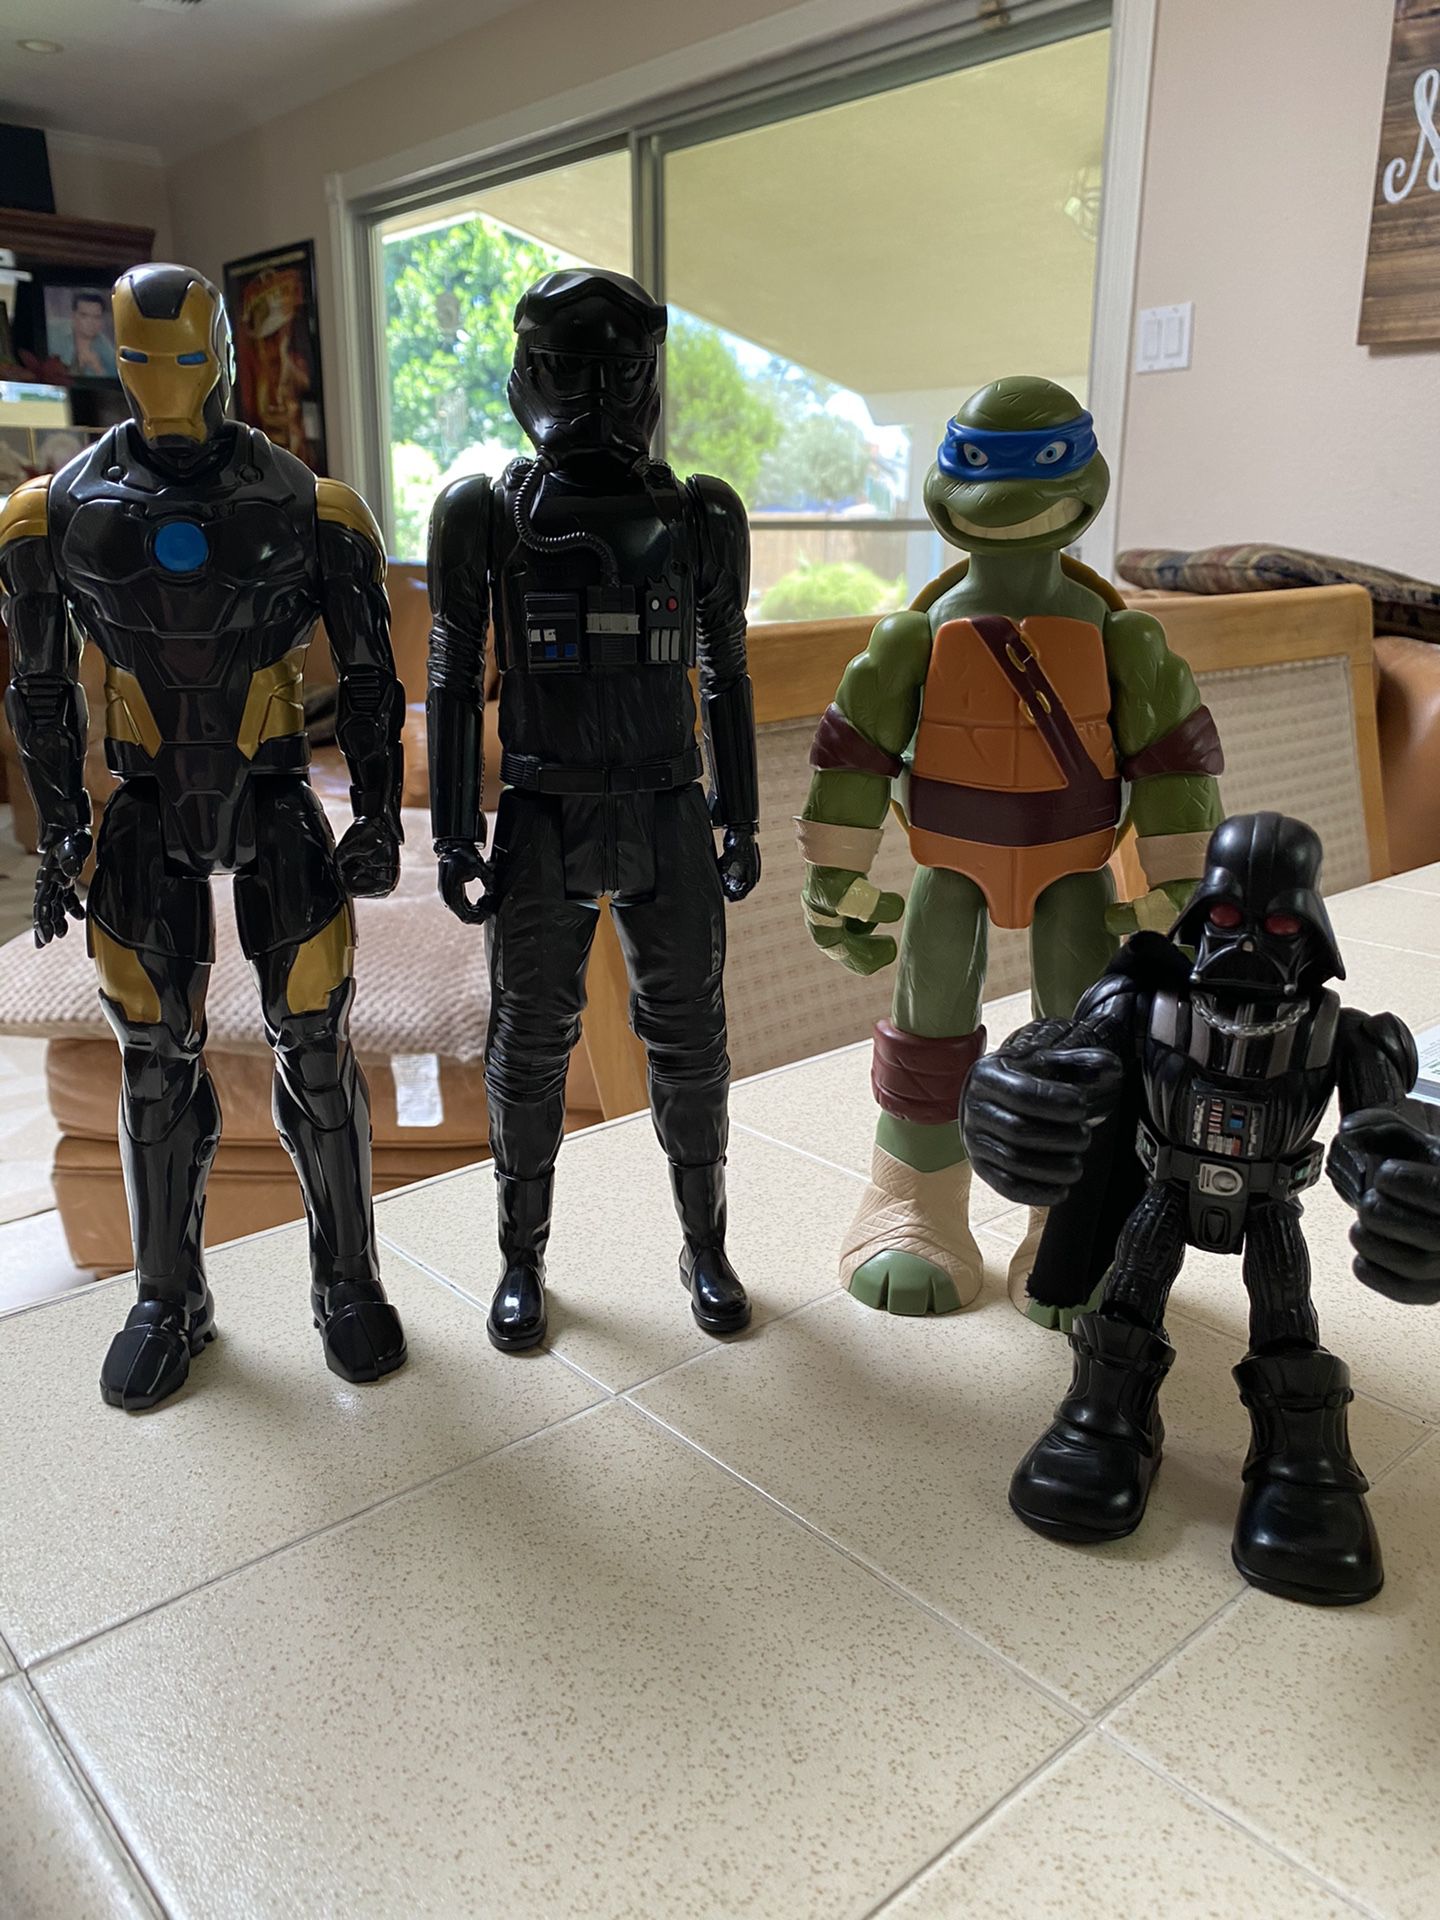 3 - 12 inch action figures— 1 - 6 inch action figure $10 each